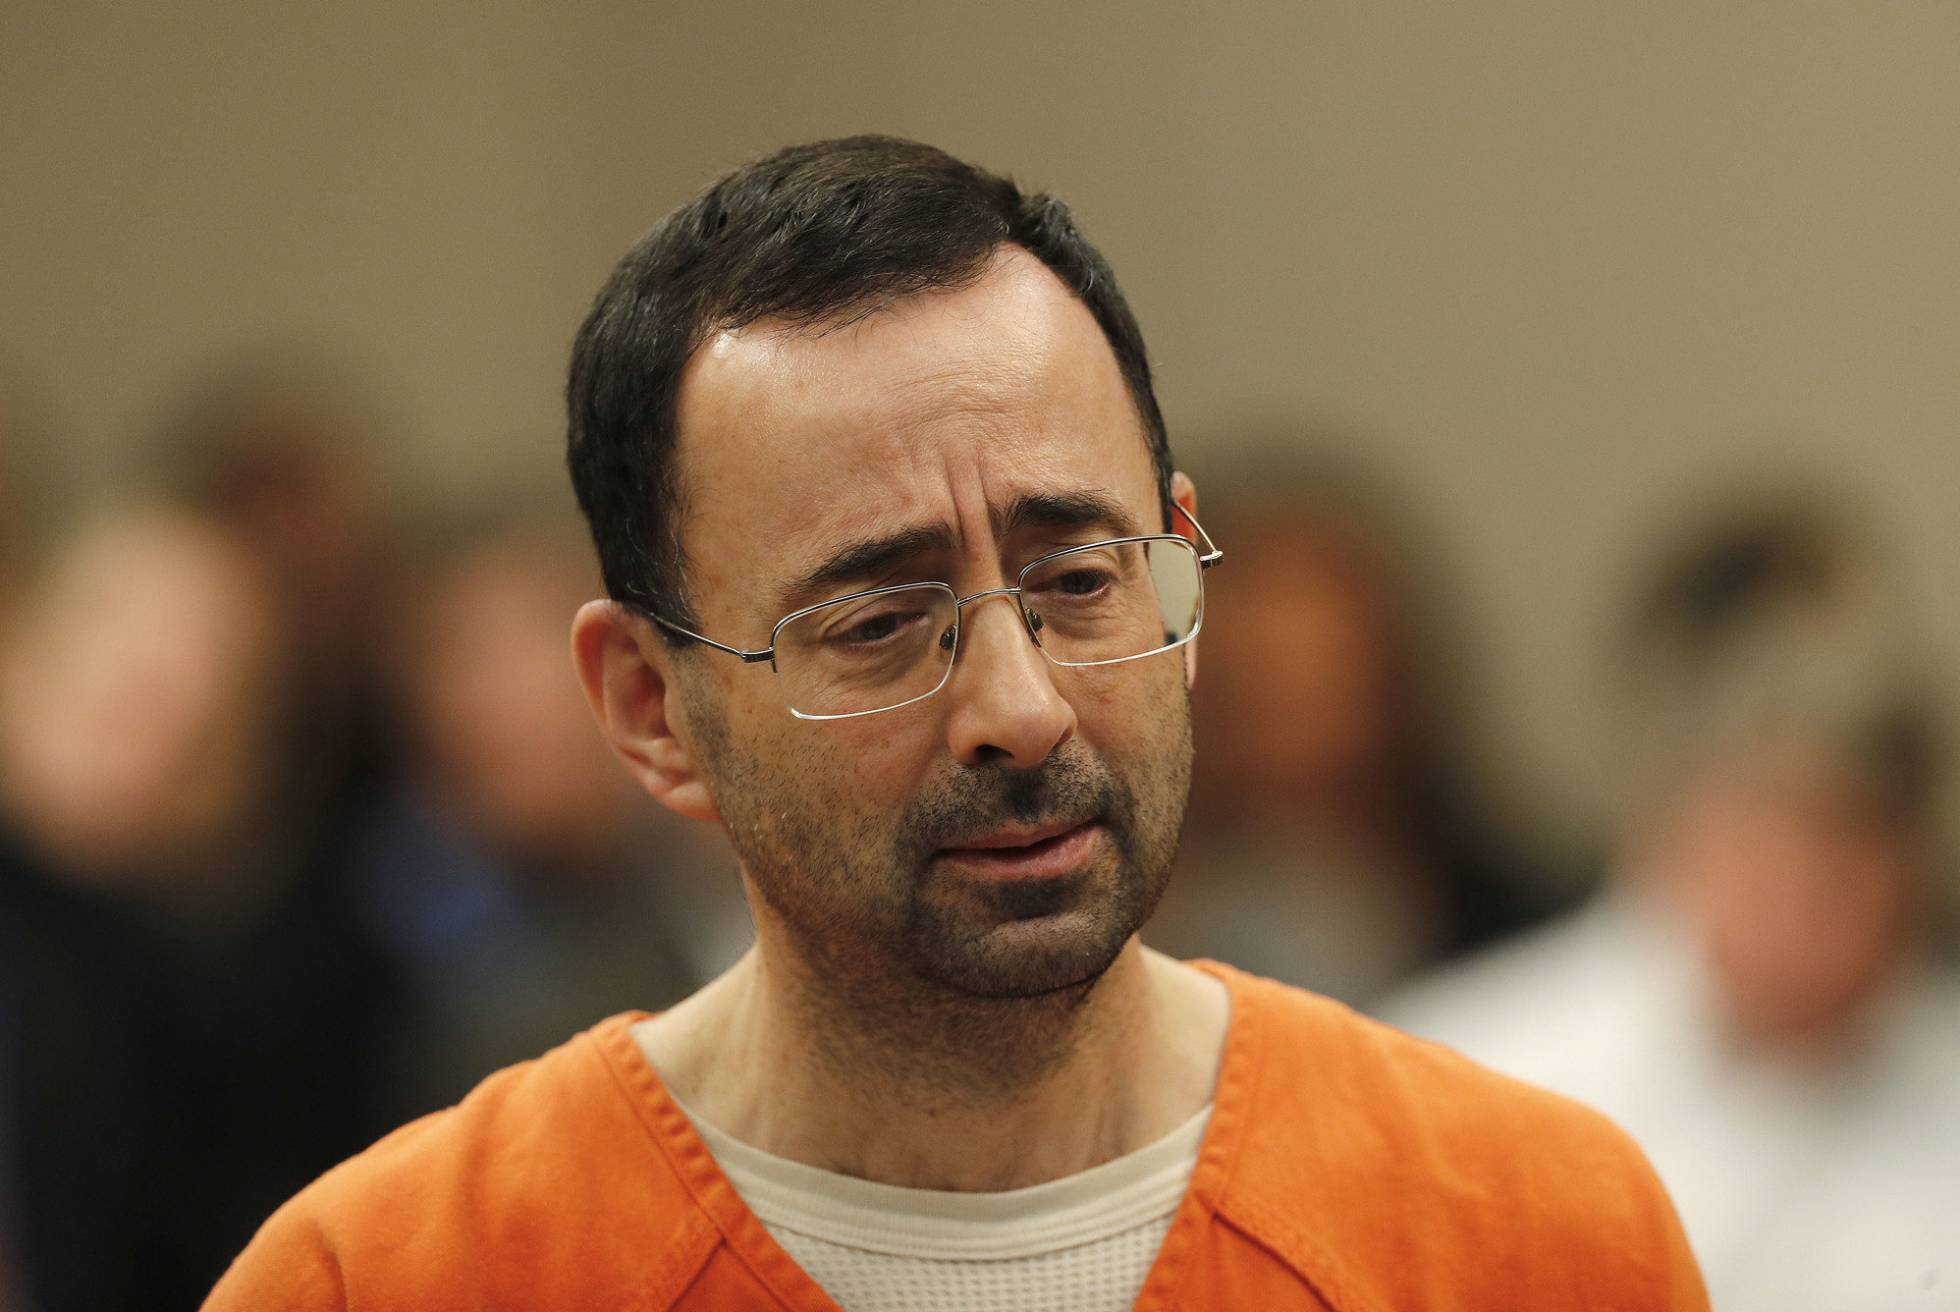 Olympic Doctor Larry Nassar Sentenced To 175 Years In Prison For Sexually Abusing Gymnasts And